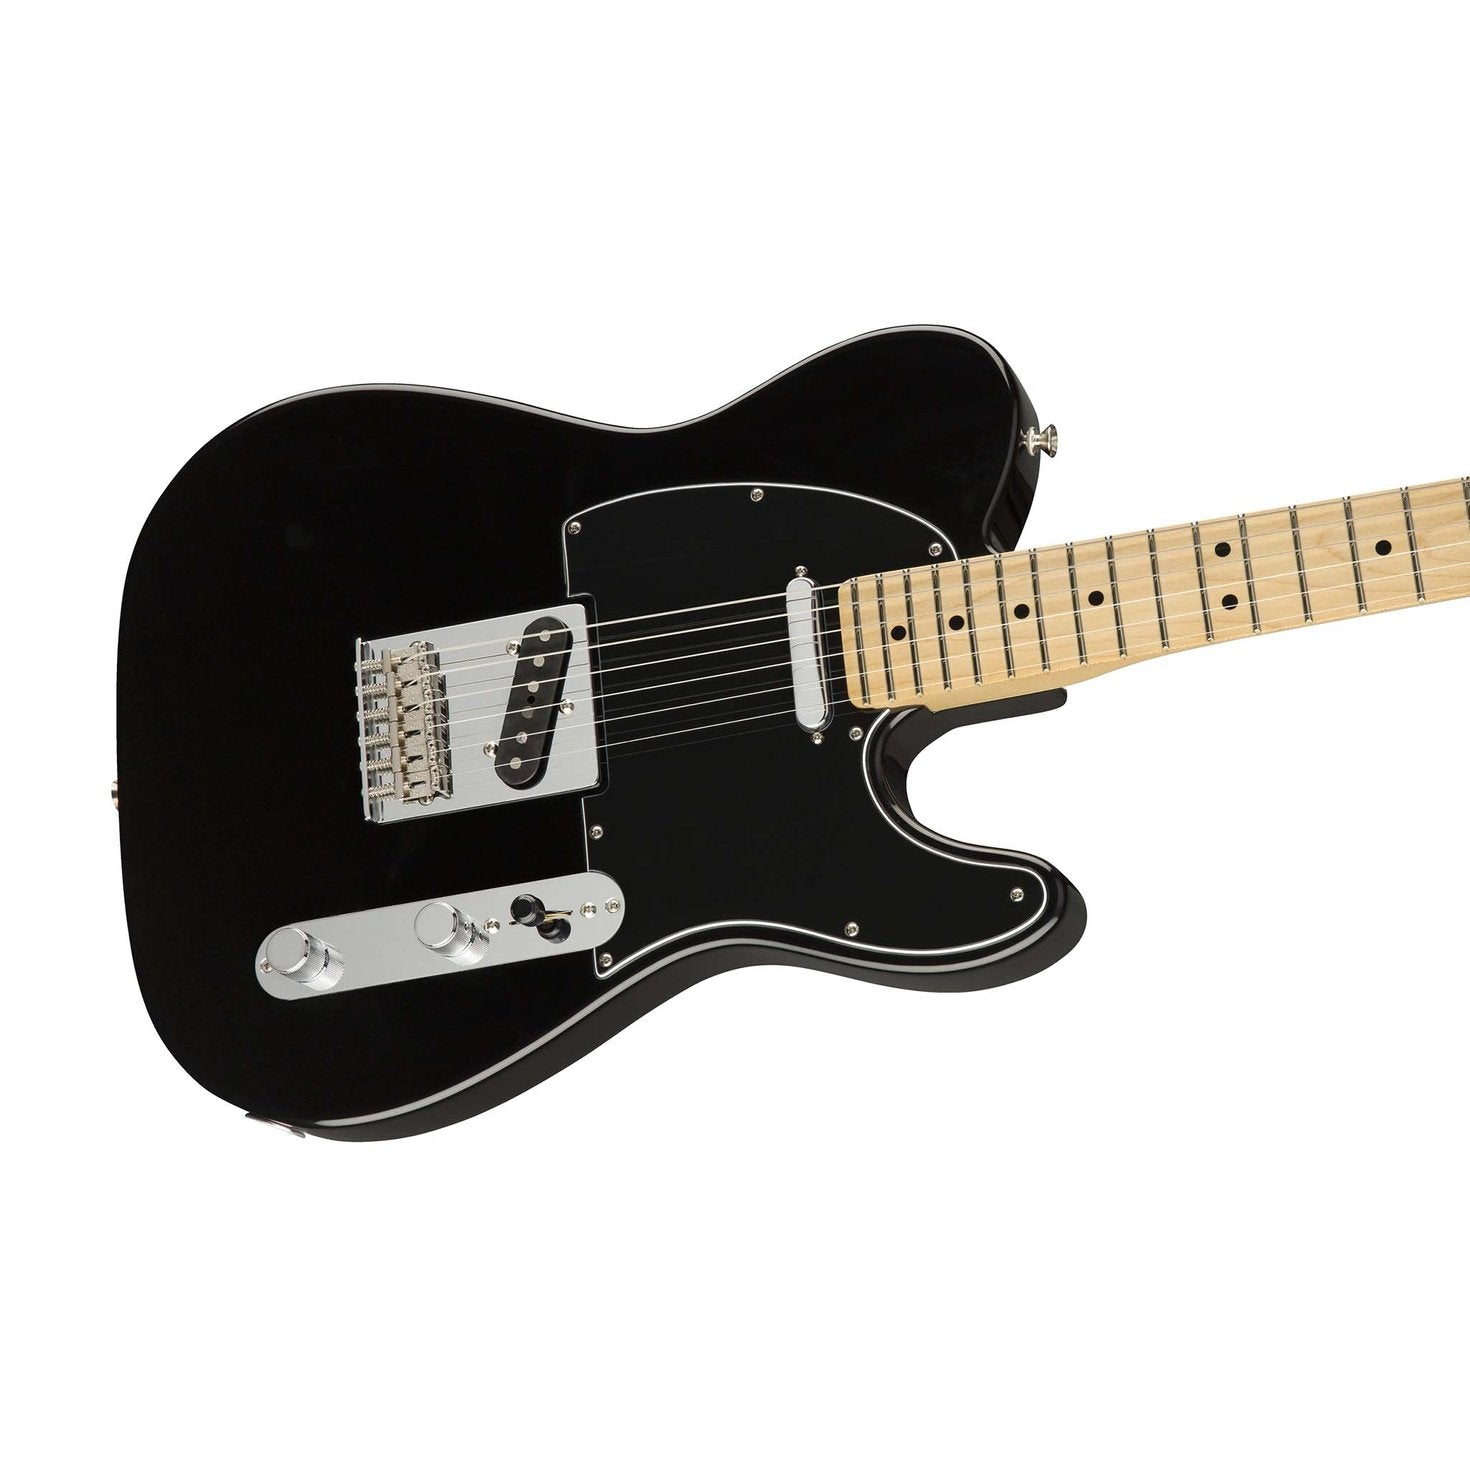 Fender Player Telecaster Electric Guitar, Maple FB, Black, FENDER, ELECTRIC GUITAR, fender-eletric-guitar-f03-014-5212-506, ZOSO MUSIC SDN BHD